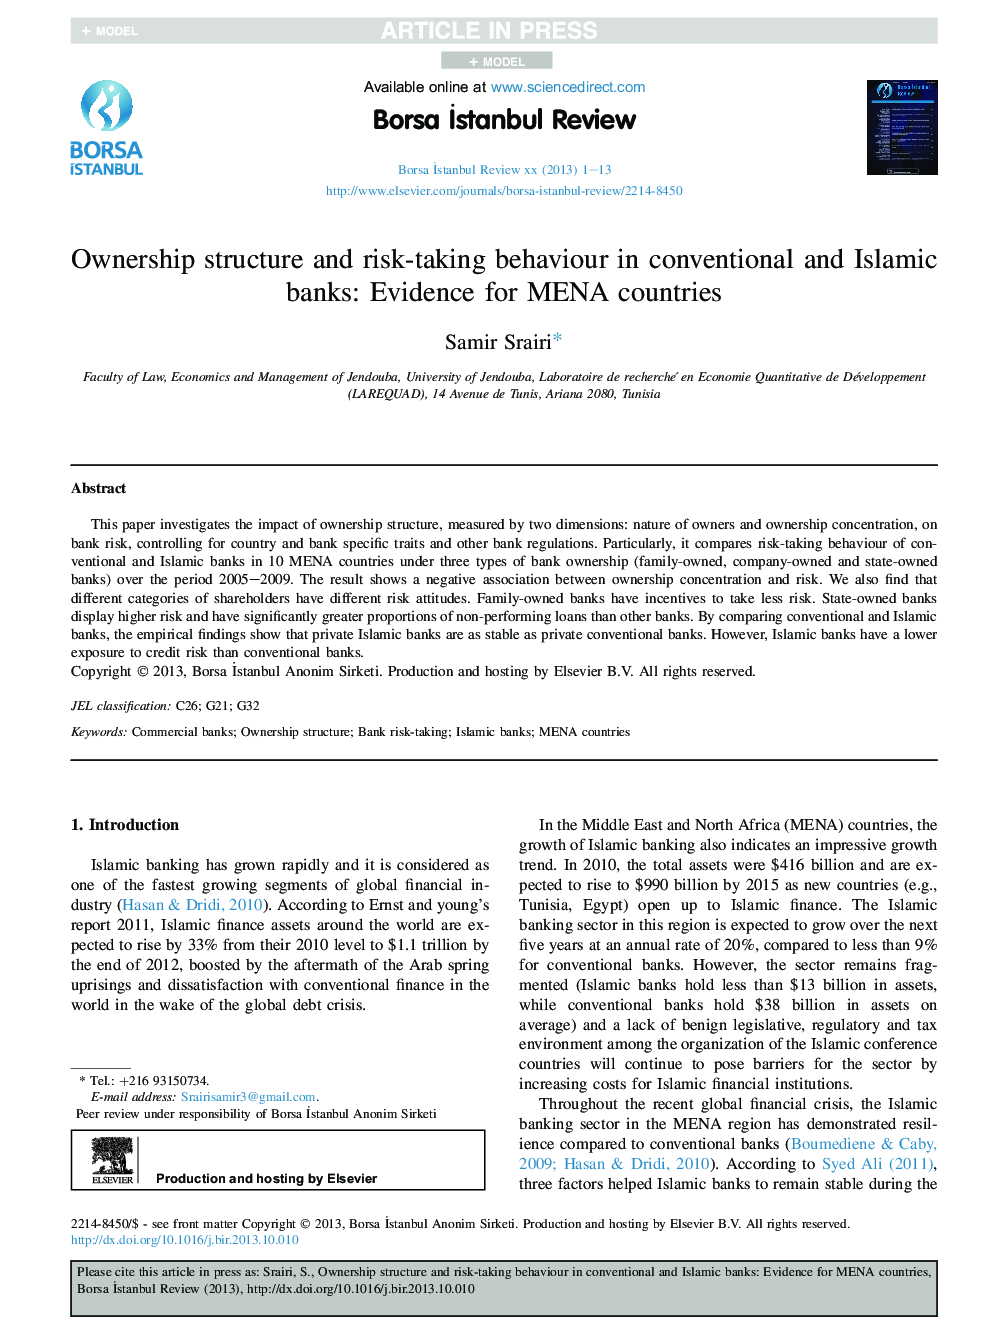 Ownership structure and risk-taking behaviour in conventional and Islamic banks: Evidence for MENA countries